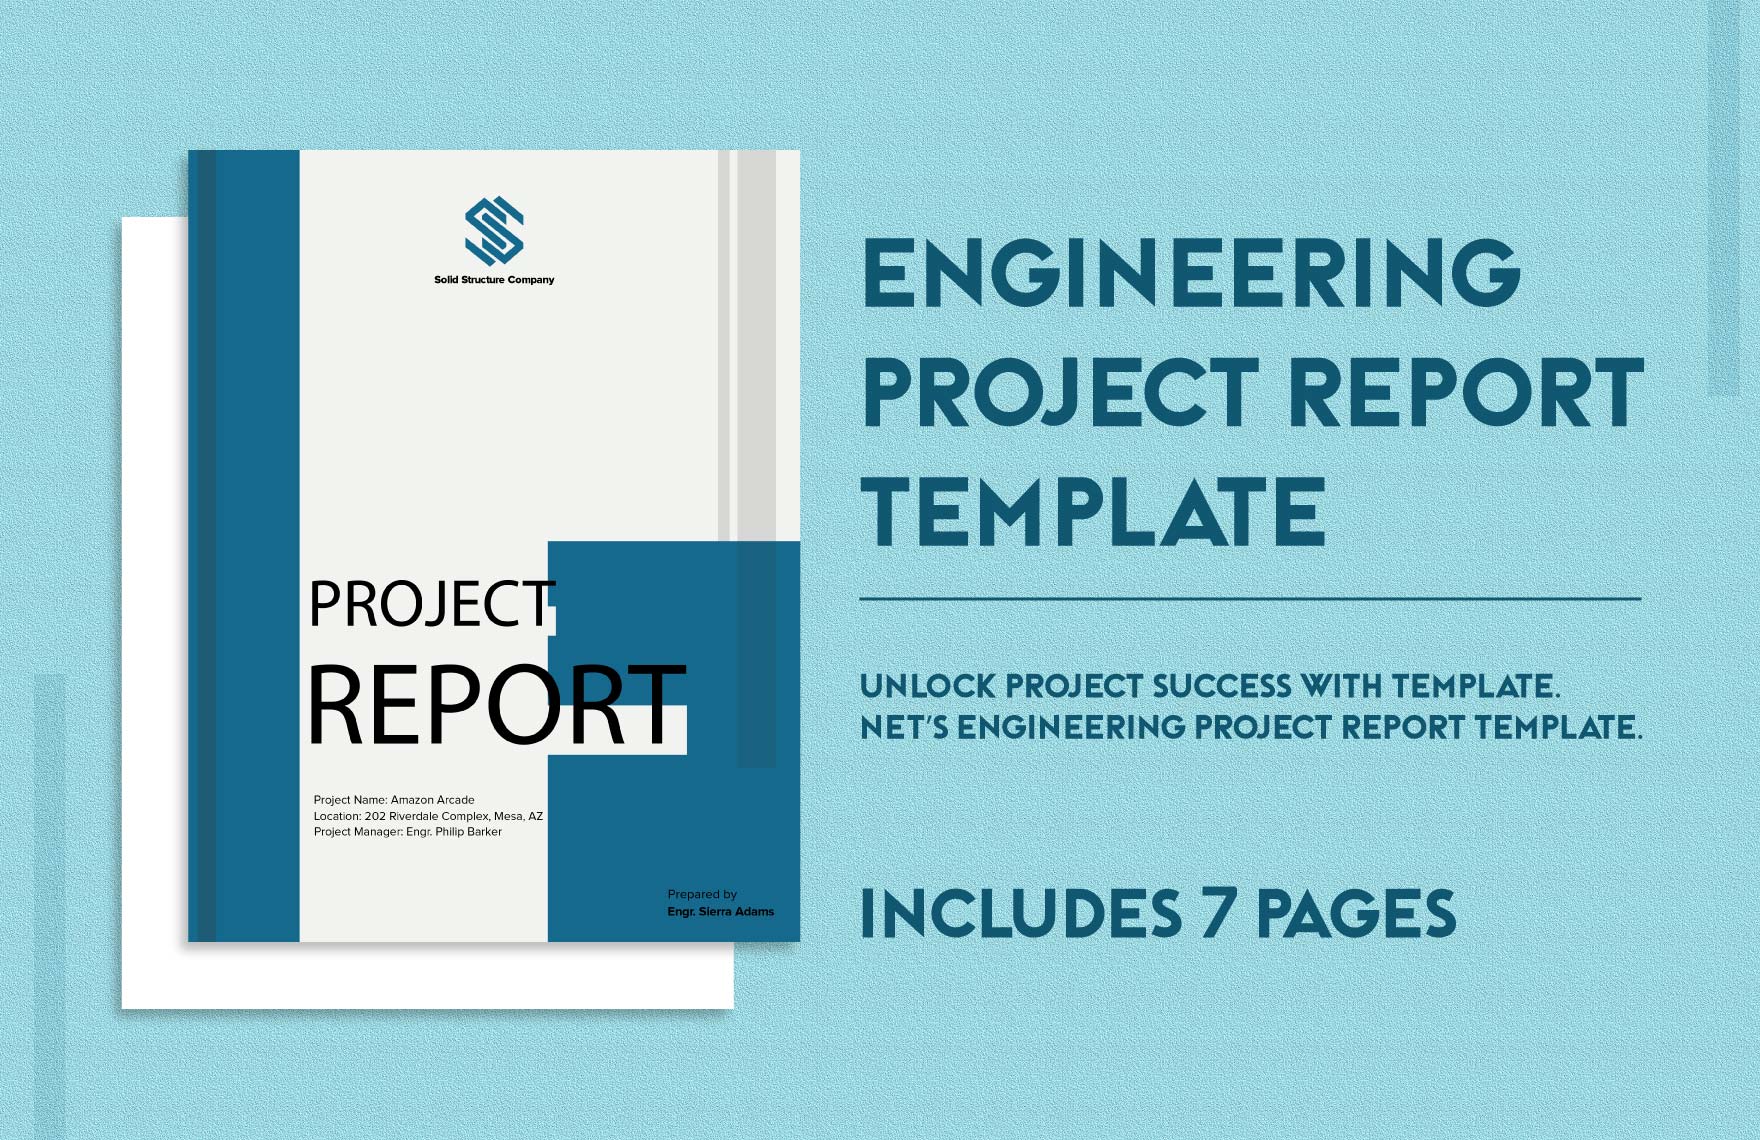 Engineering Project Report Template